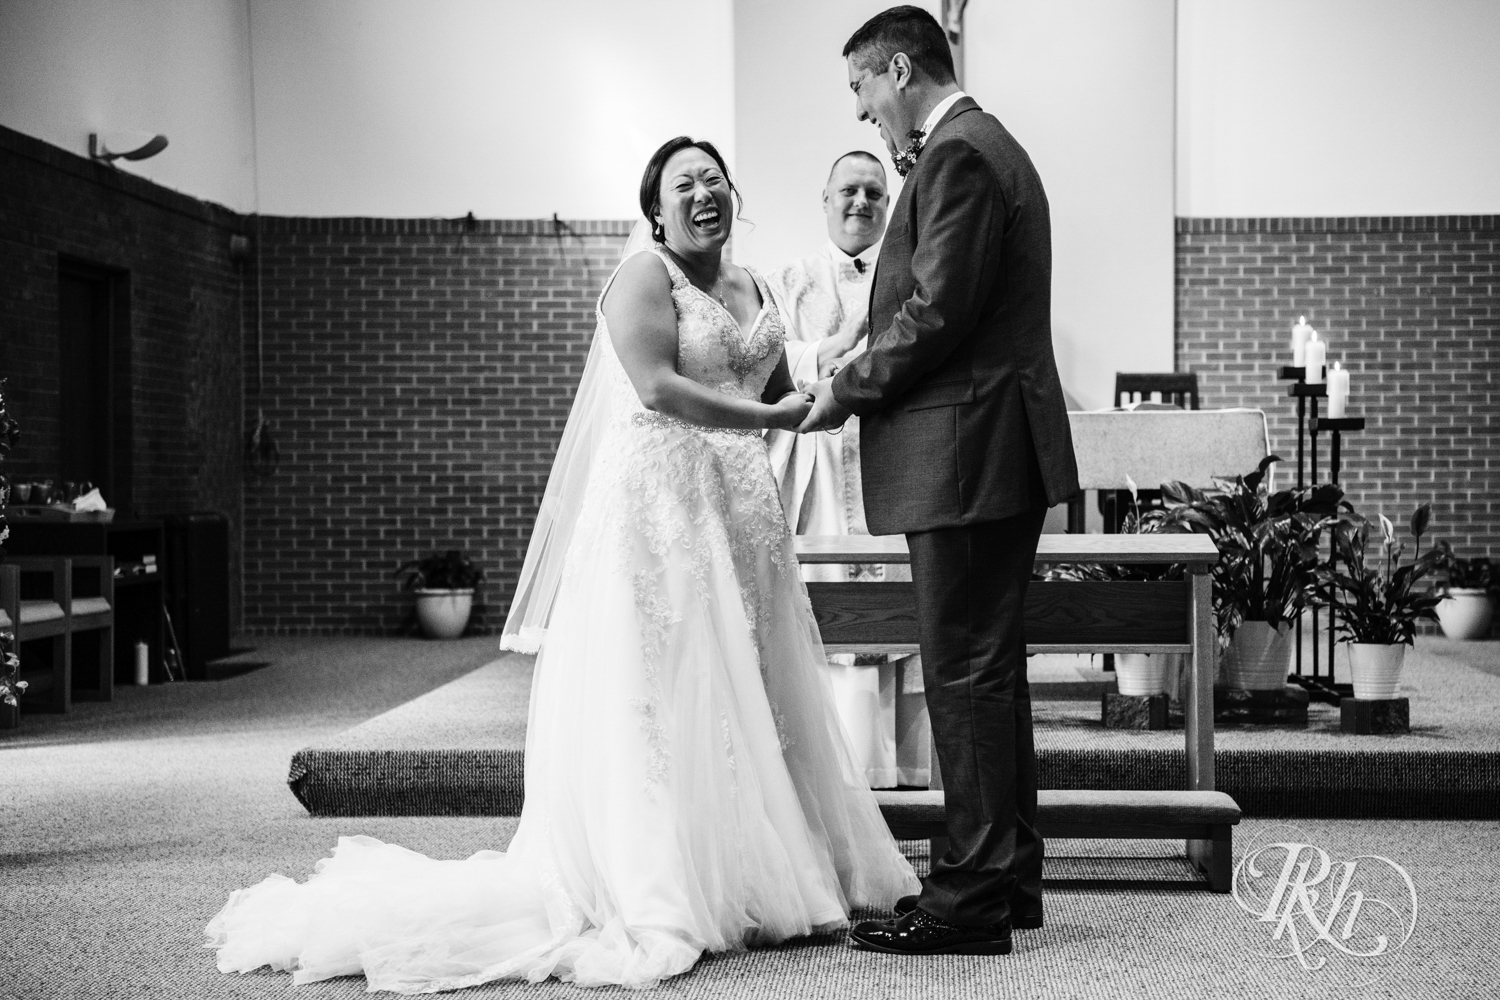 Bride and groom laugh during church wedding ceremony in Minneapolis, Minnesota.